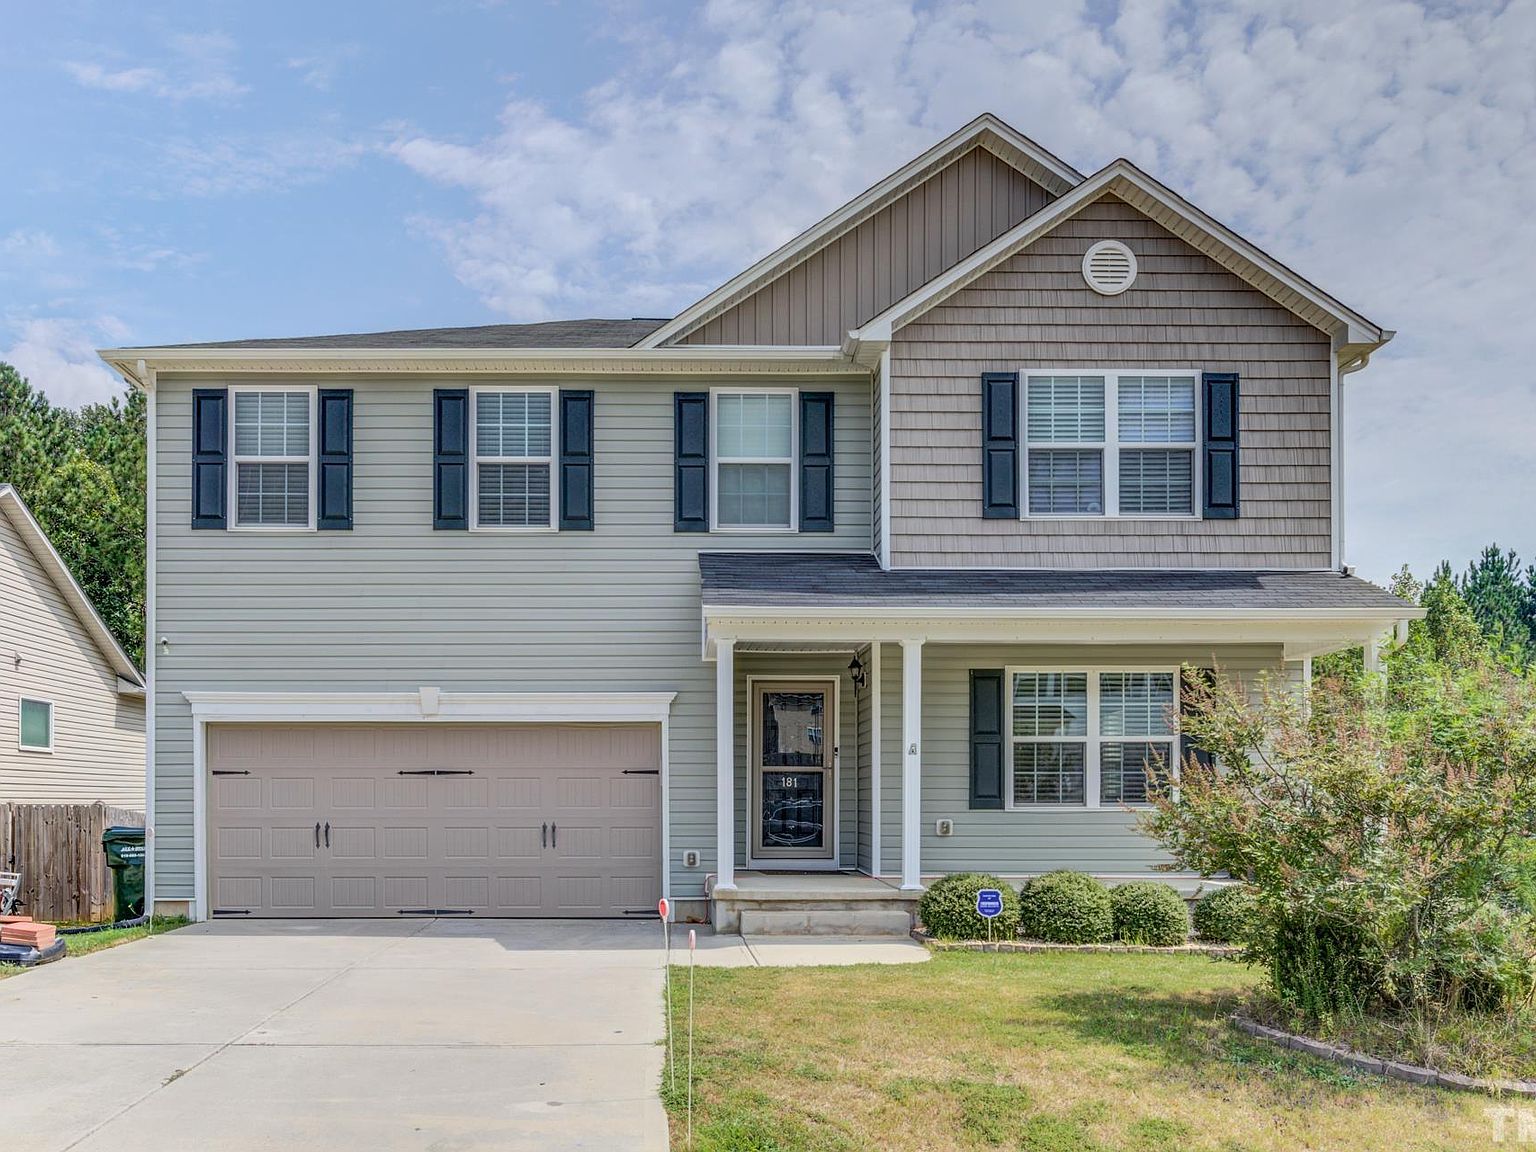 181 Sequoia Dr, Clayton, NC 27527 | Zillow